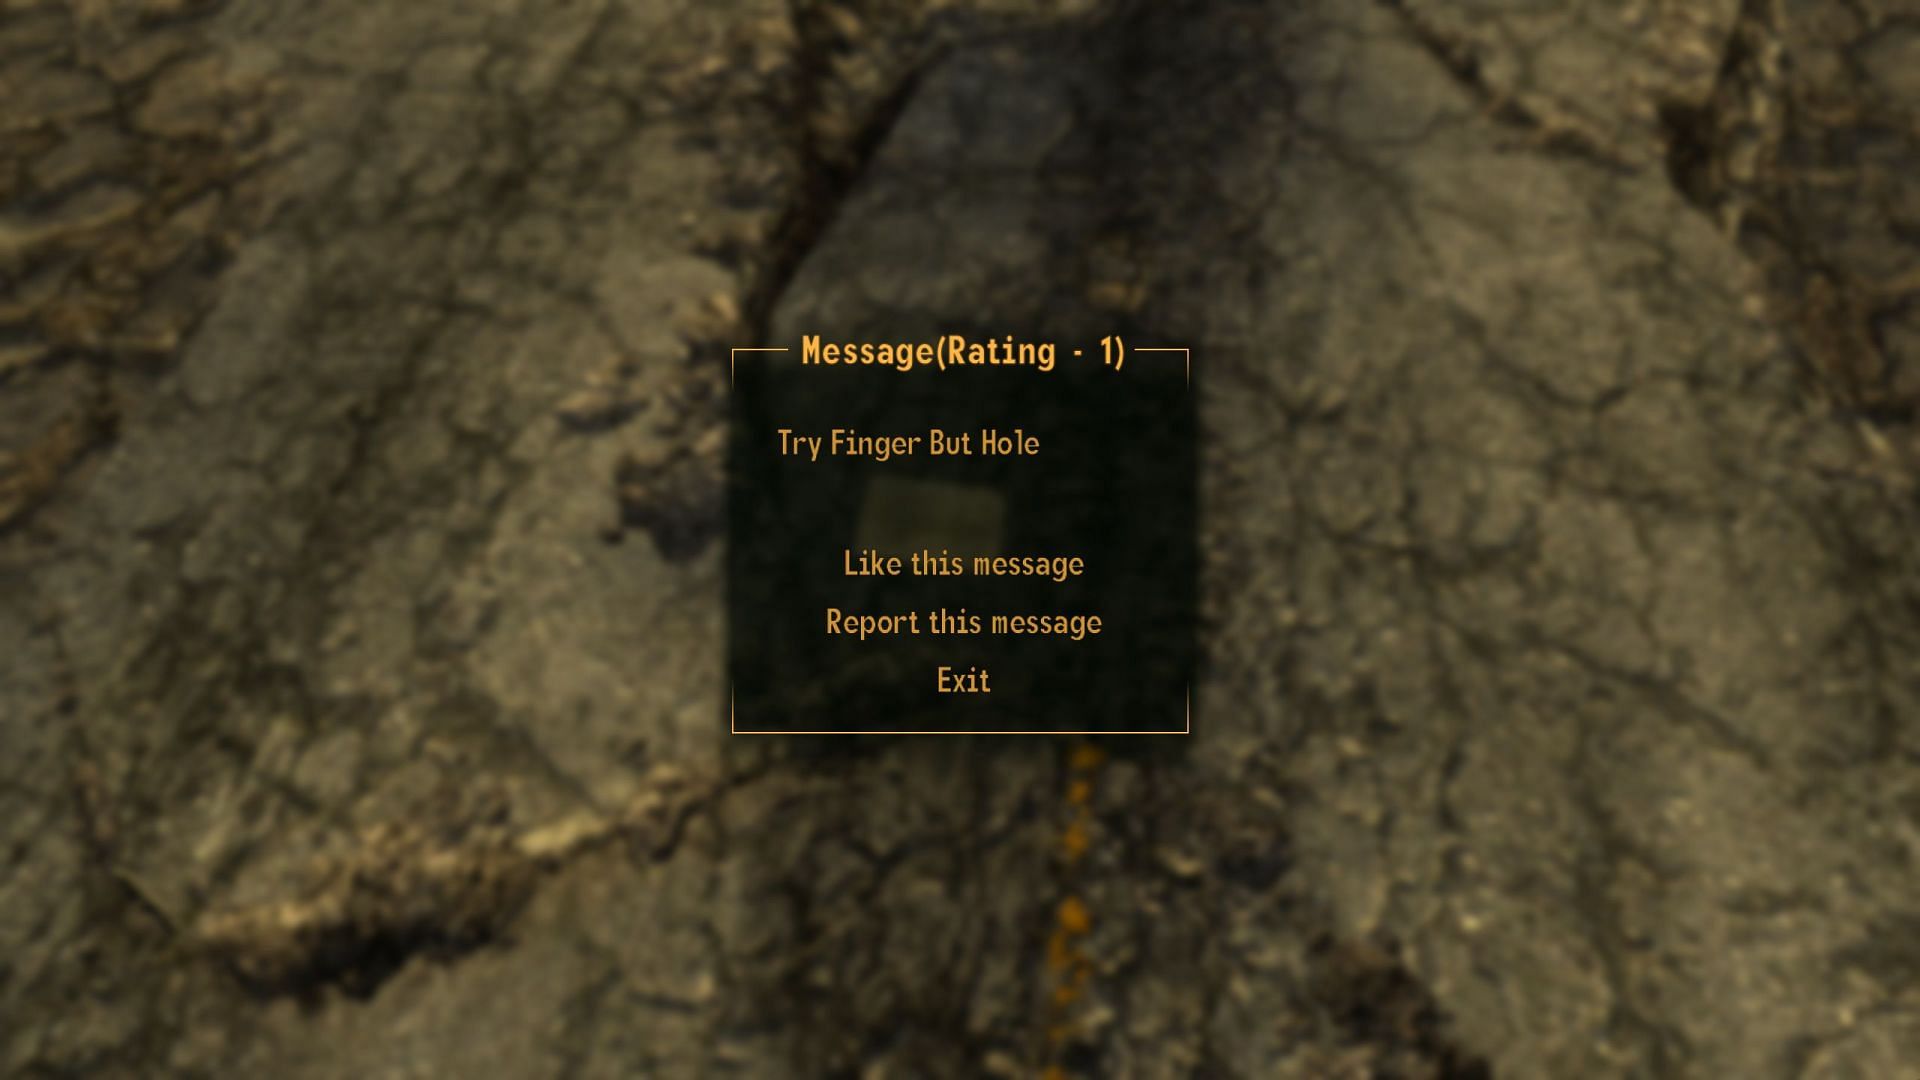 Souls-borne community jokes can sometimes get risque, as Fallout: New Vegas players will soon find out (Image via Nexusmods)